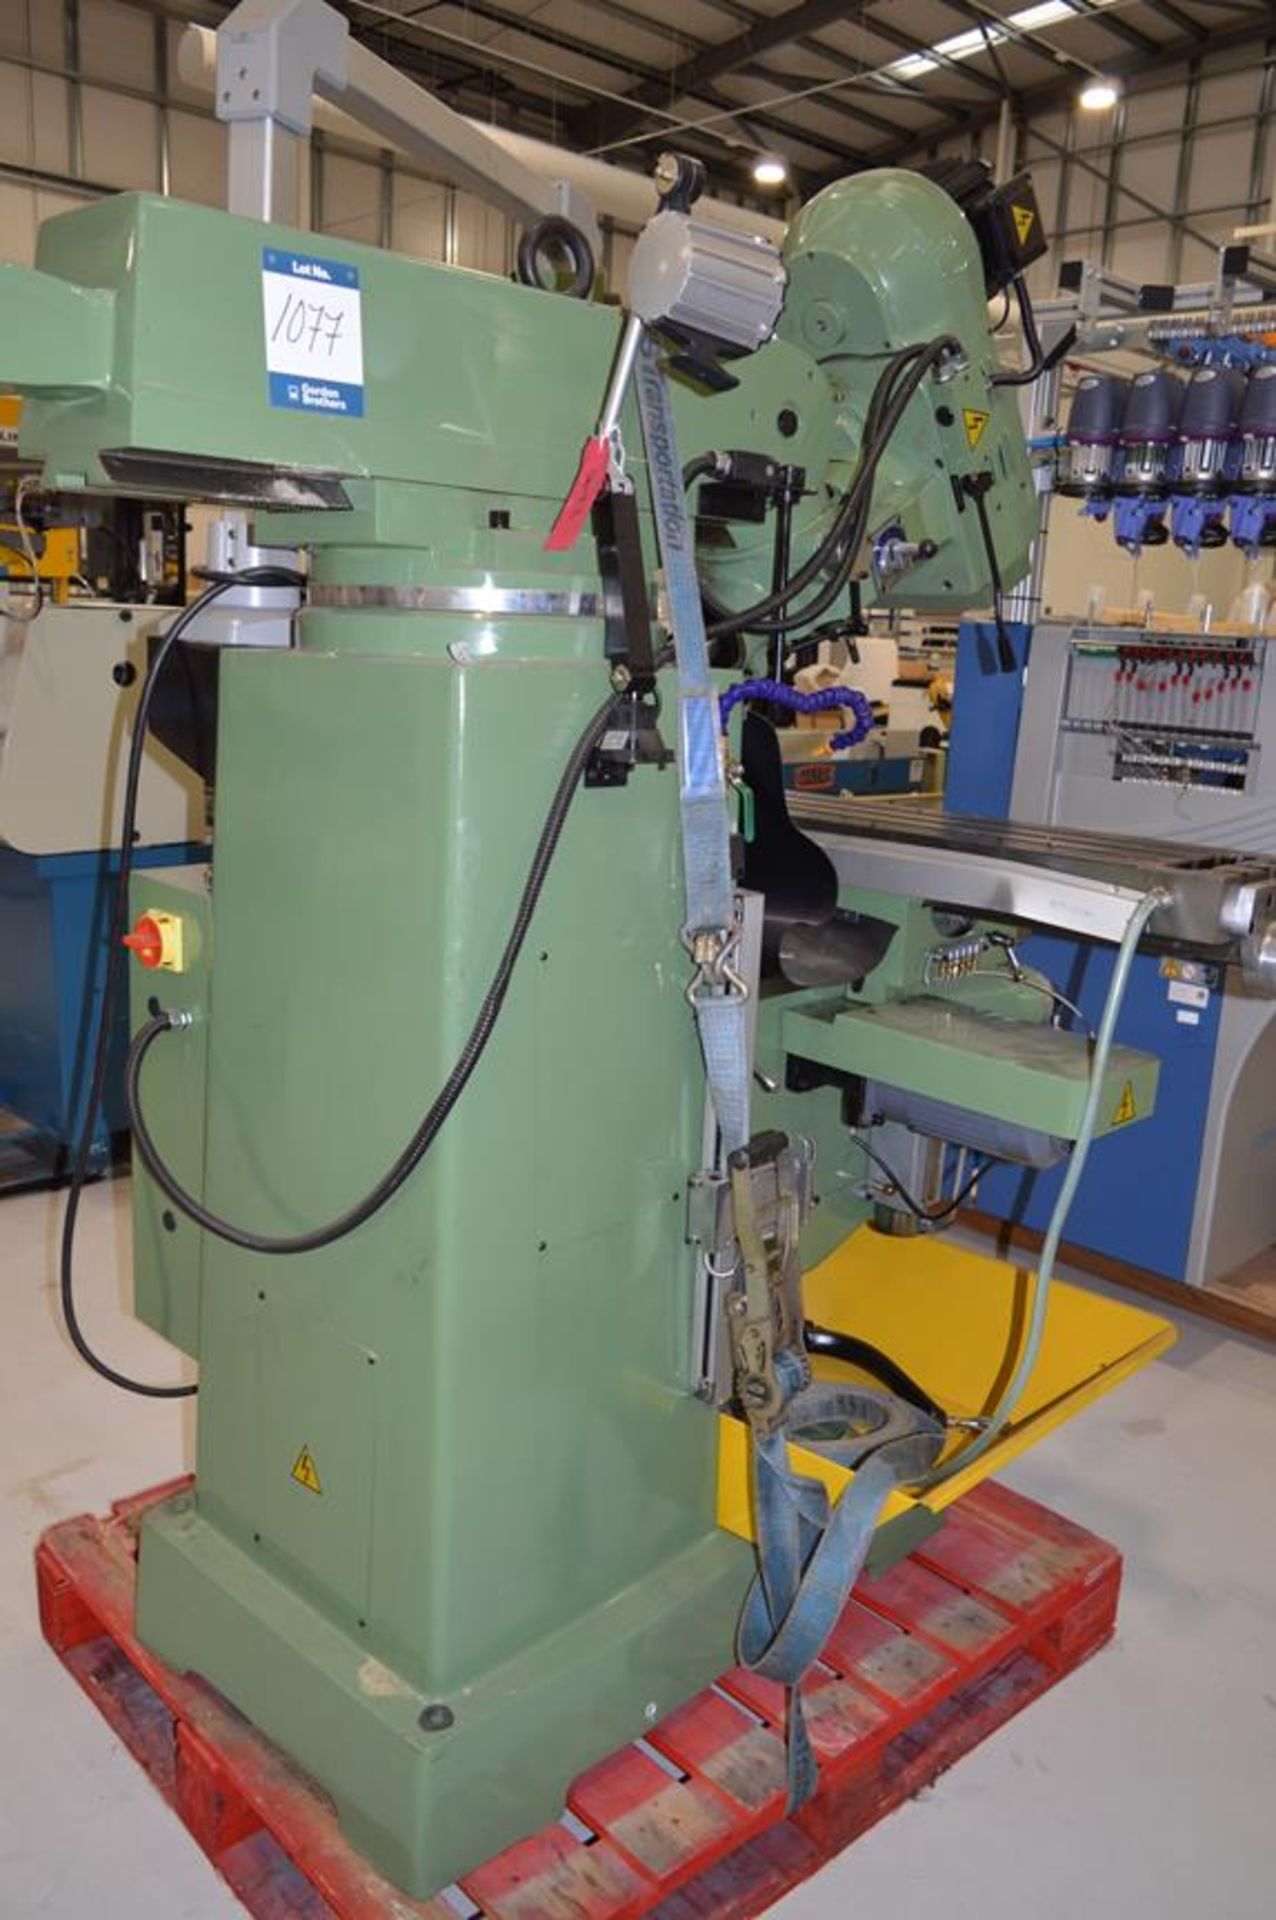 Warco, WM40 turret head milling machine, Serial No. 1910107 (DOM: 2021) with Sinc SDS6-3V DRO and po - Image 4 of 10